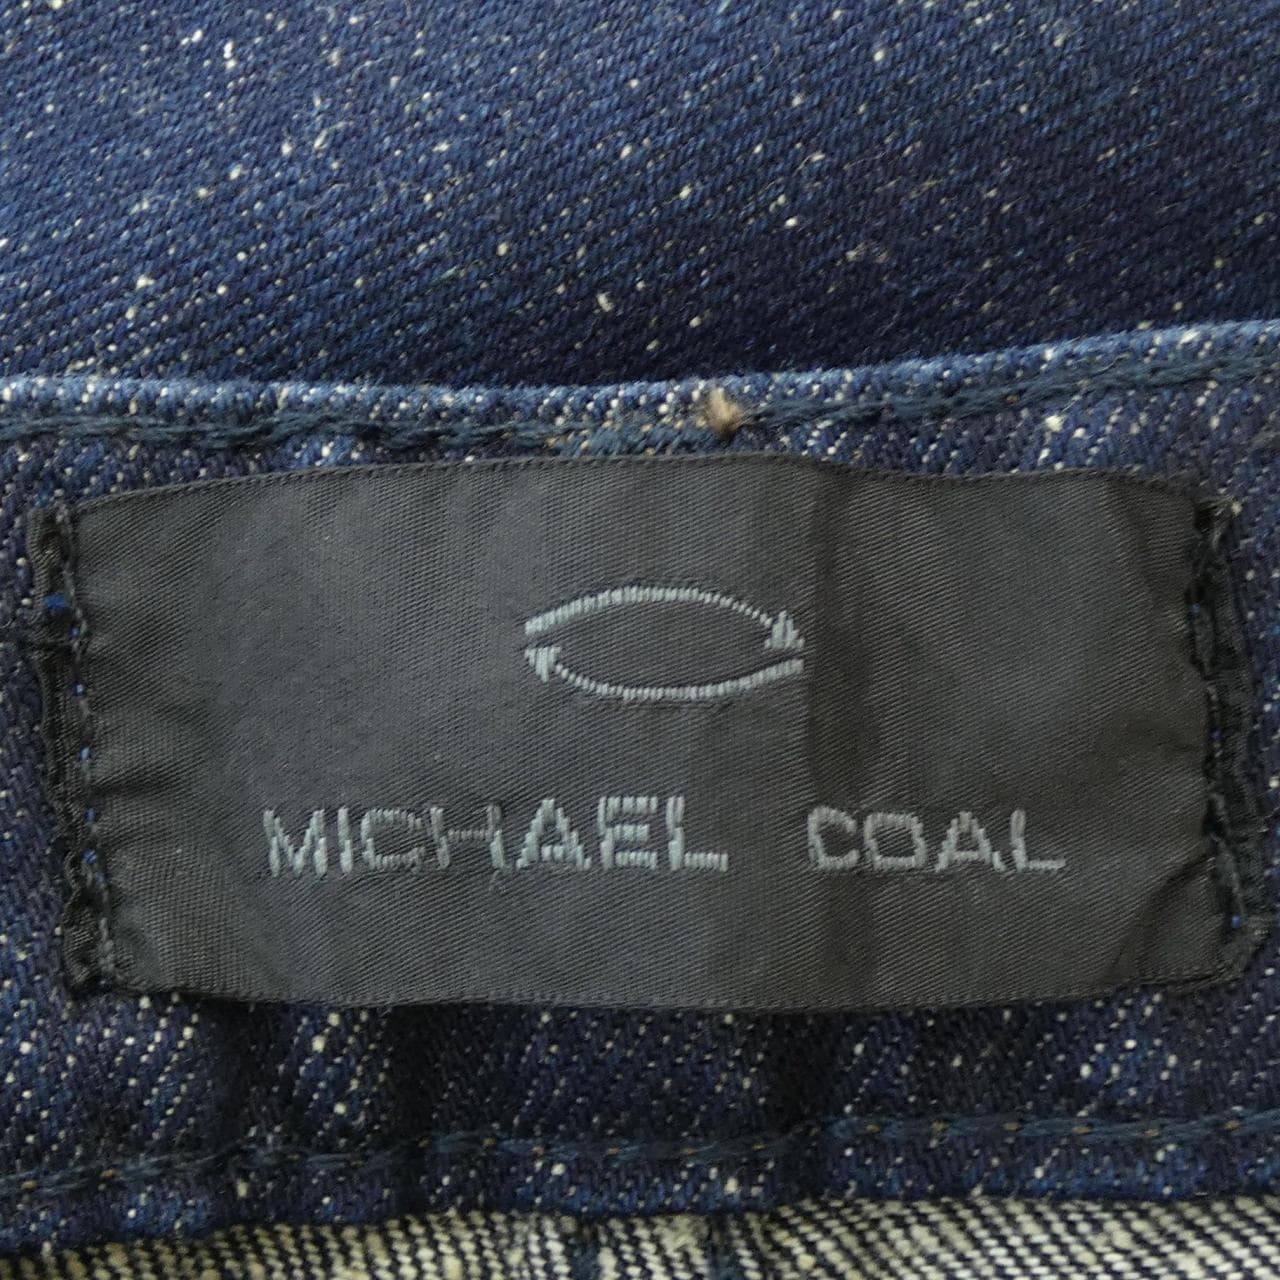 MICHAELCOAL JEANS